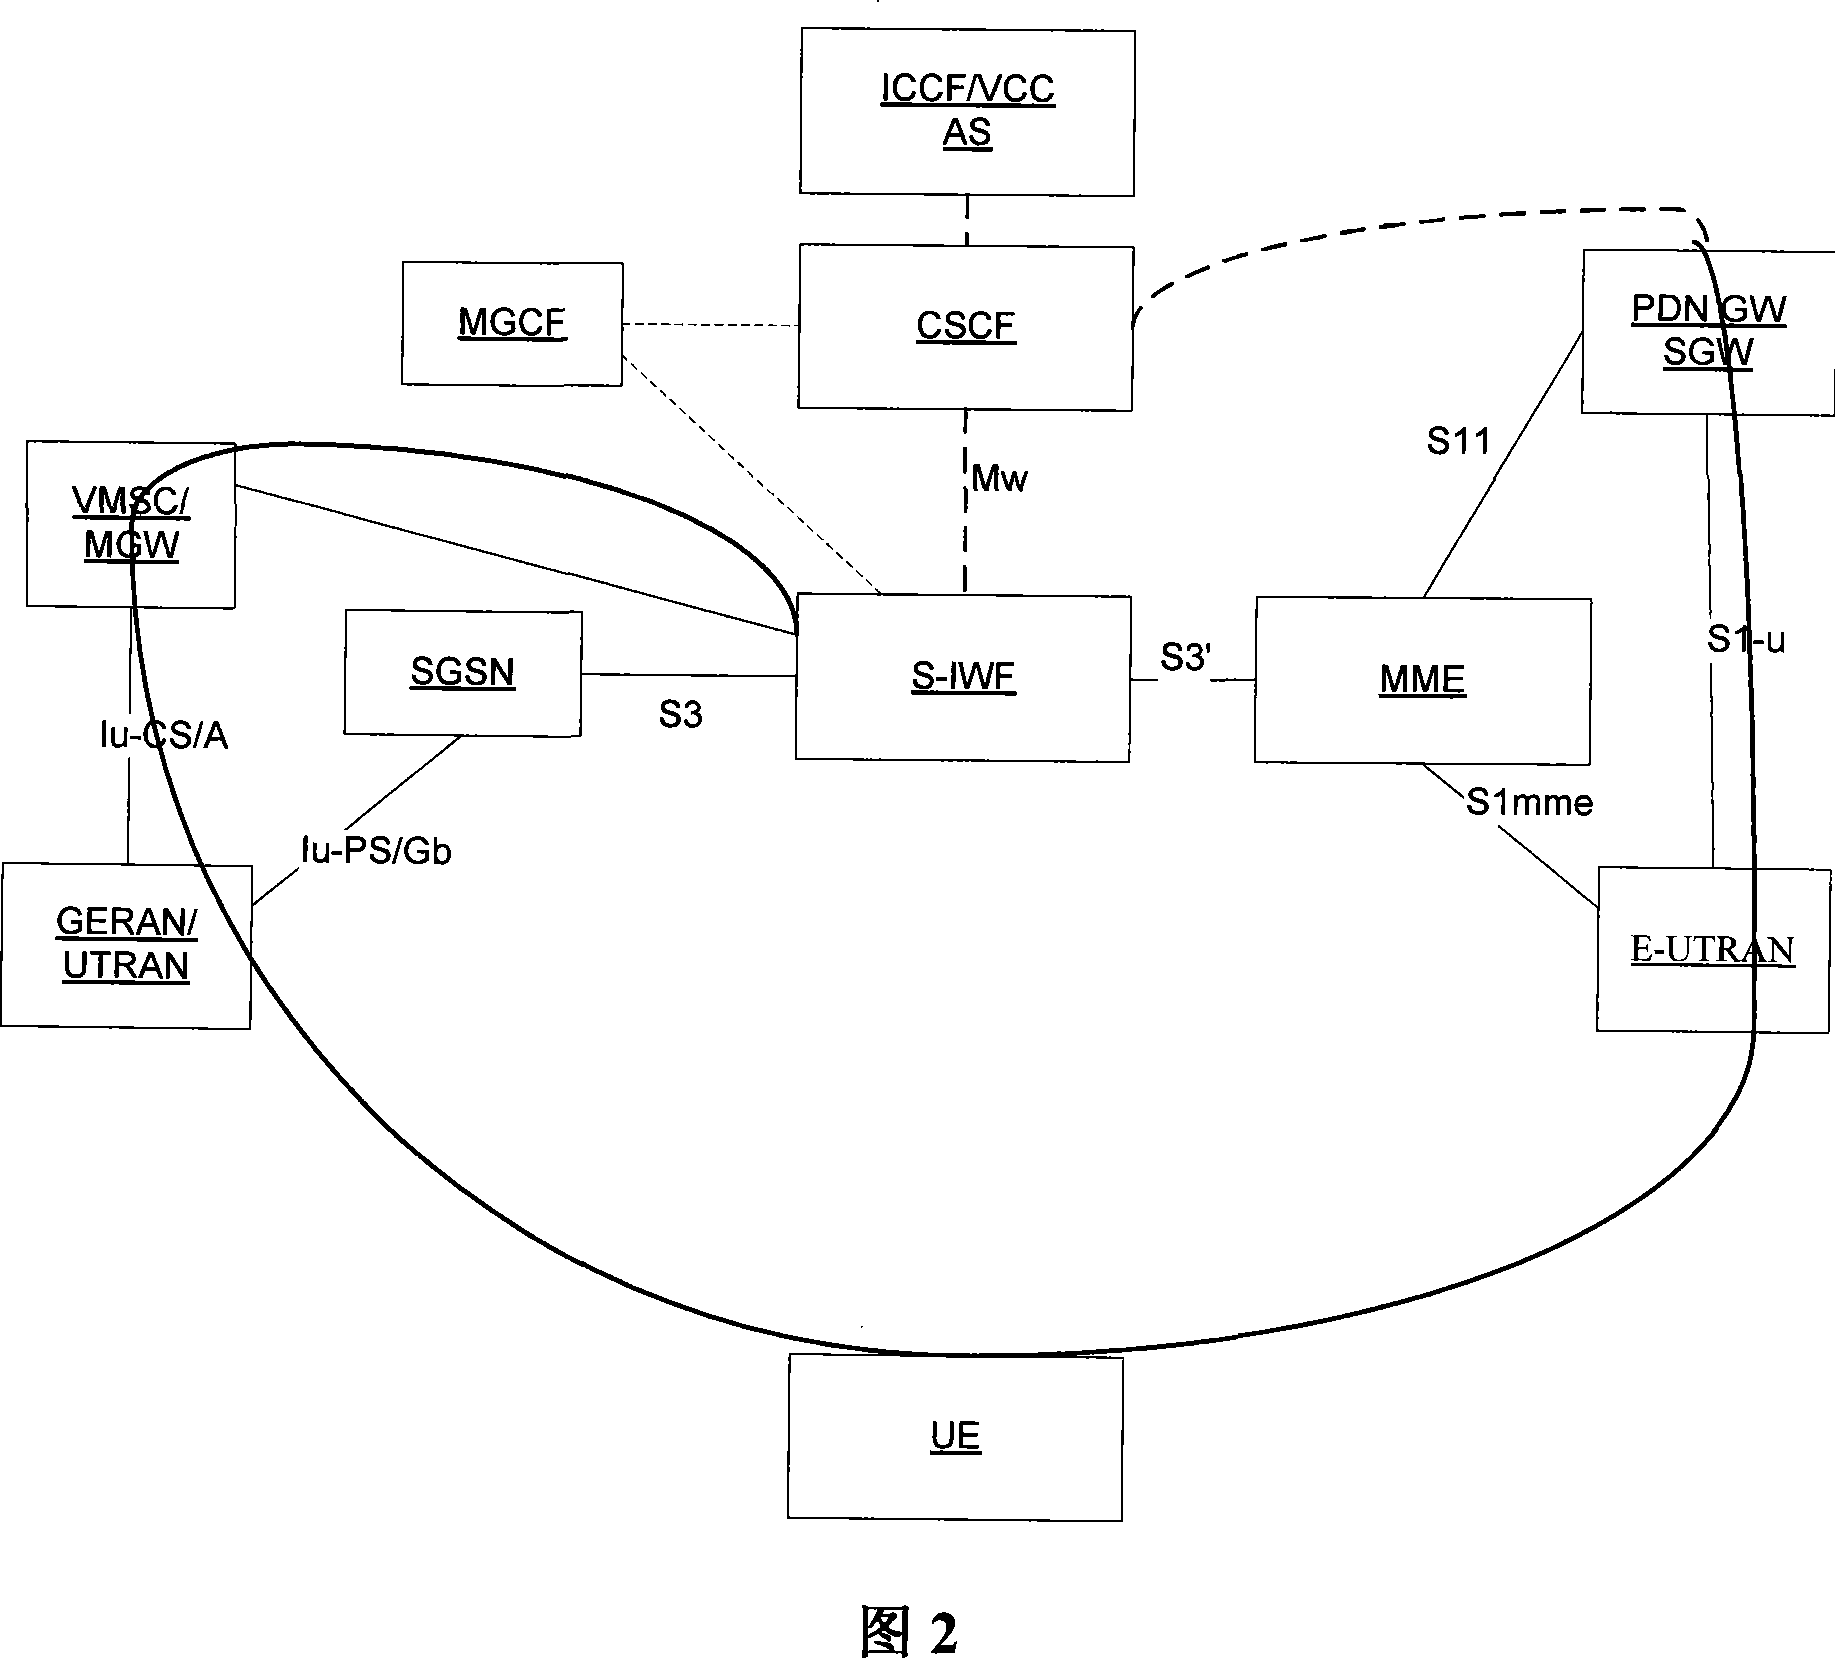 Single wireless channel voice business continuity field switching method